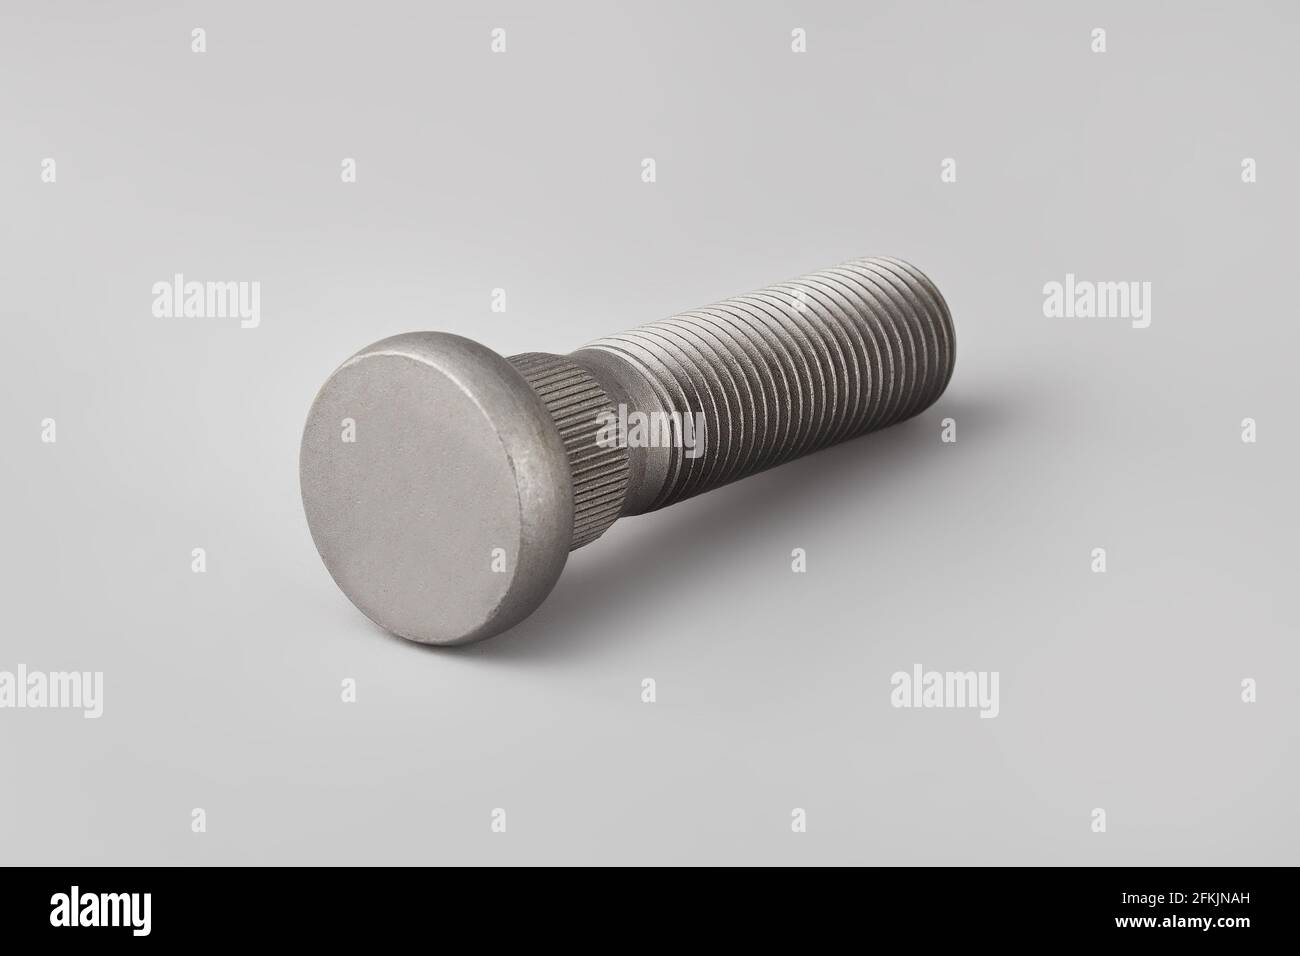 Wheel mounting bolt on a gray background. Battery terminal mounting bolt. Bolt. Car Bolt Stock Photo